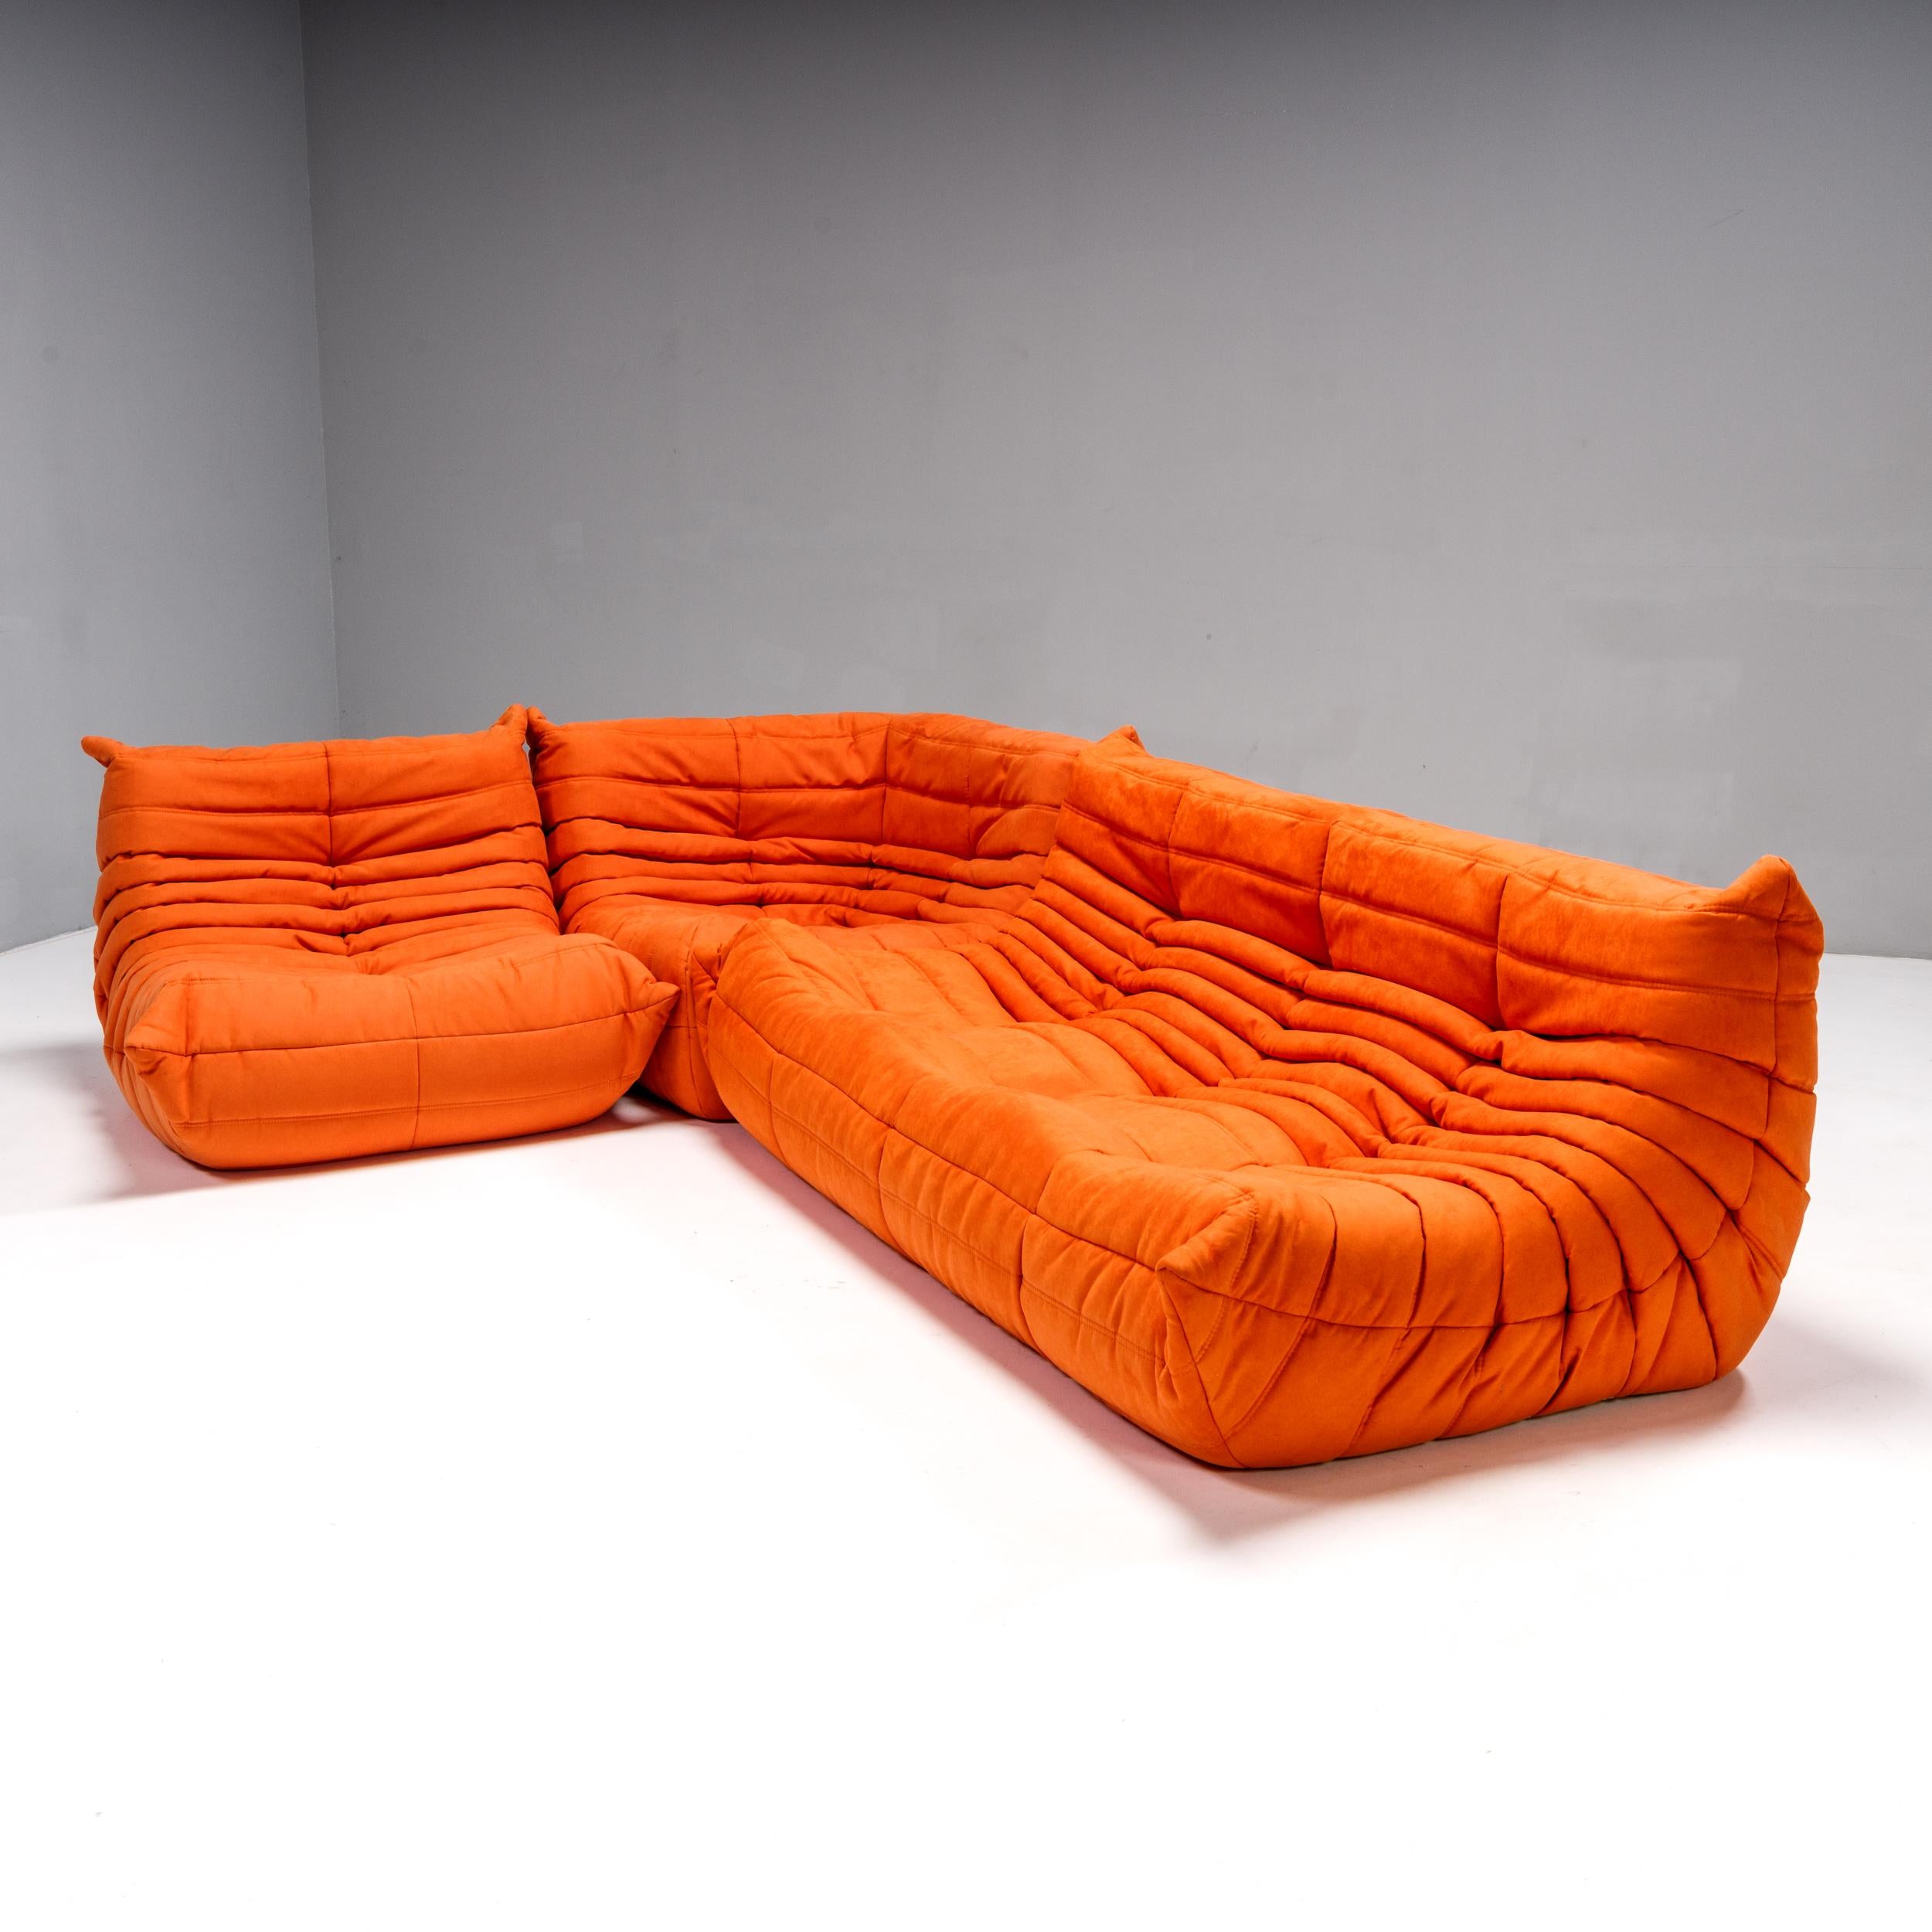 The iconic Togo sofa, originally designed by Michel Ducaroy for Ligne Roset in 1973 has become a design classic.

This three-piece modular set is incredibly versatile and can be configured into one large corner sofa or split for a multitude of